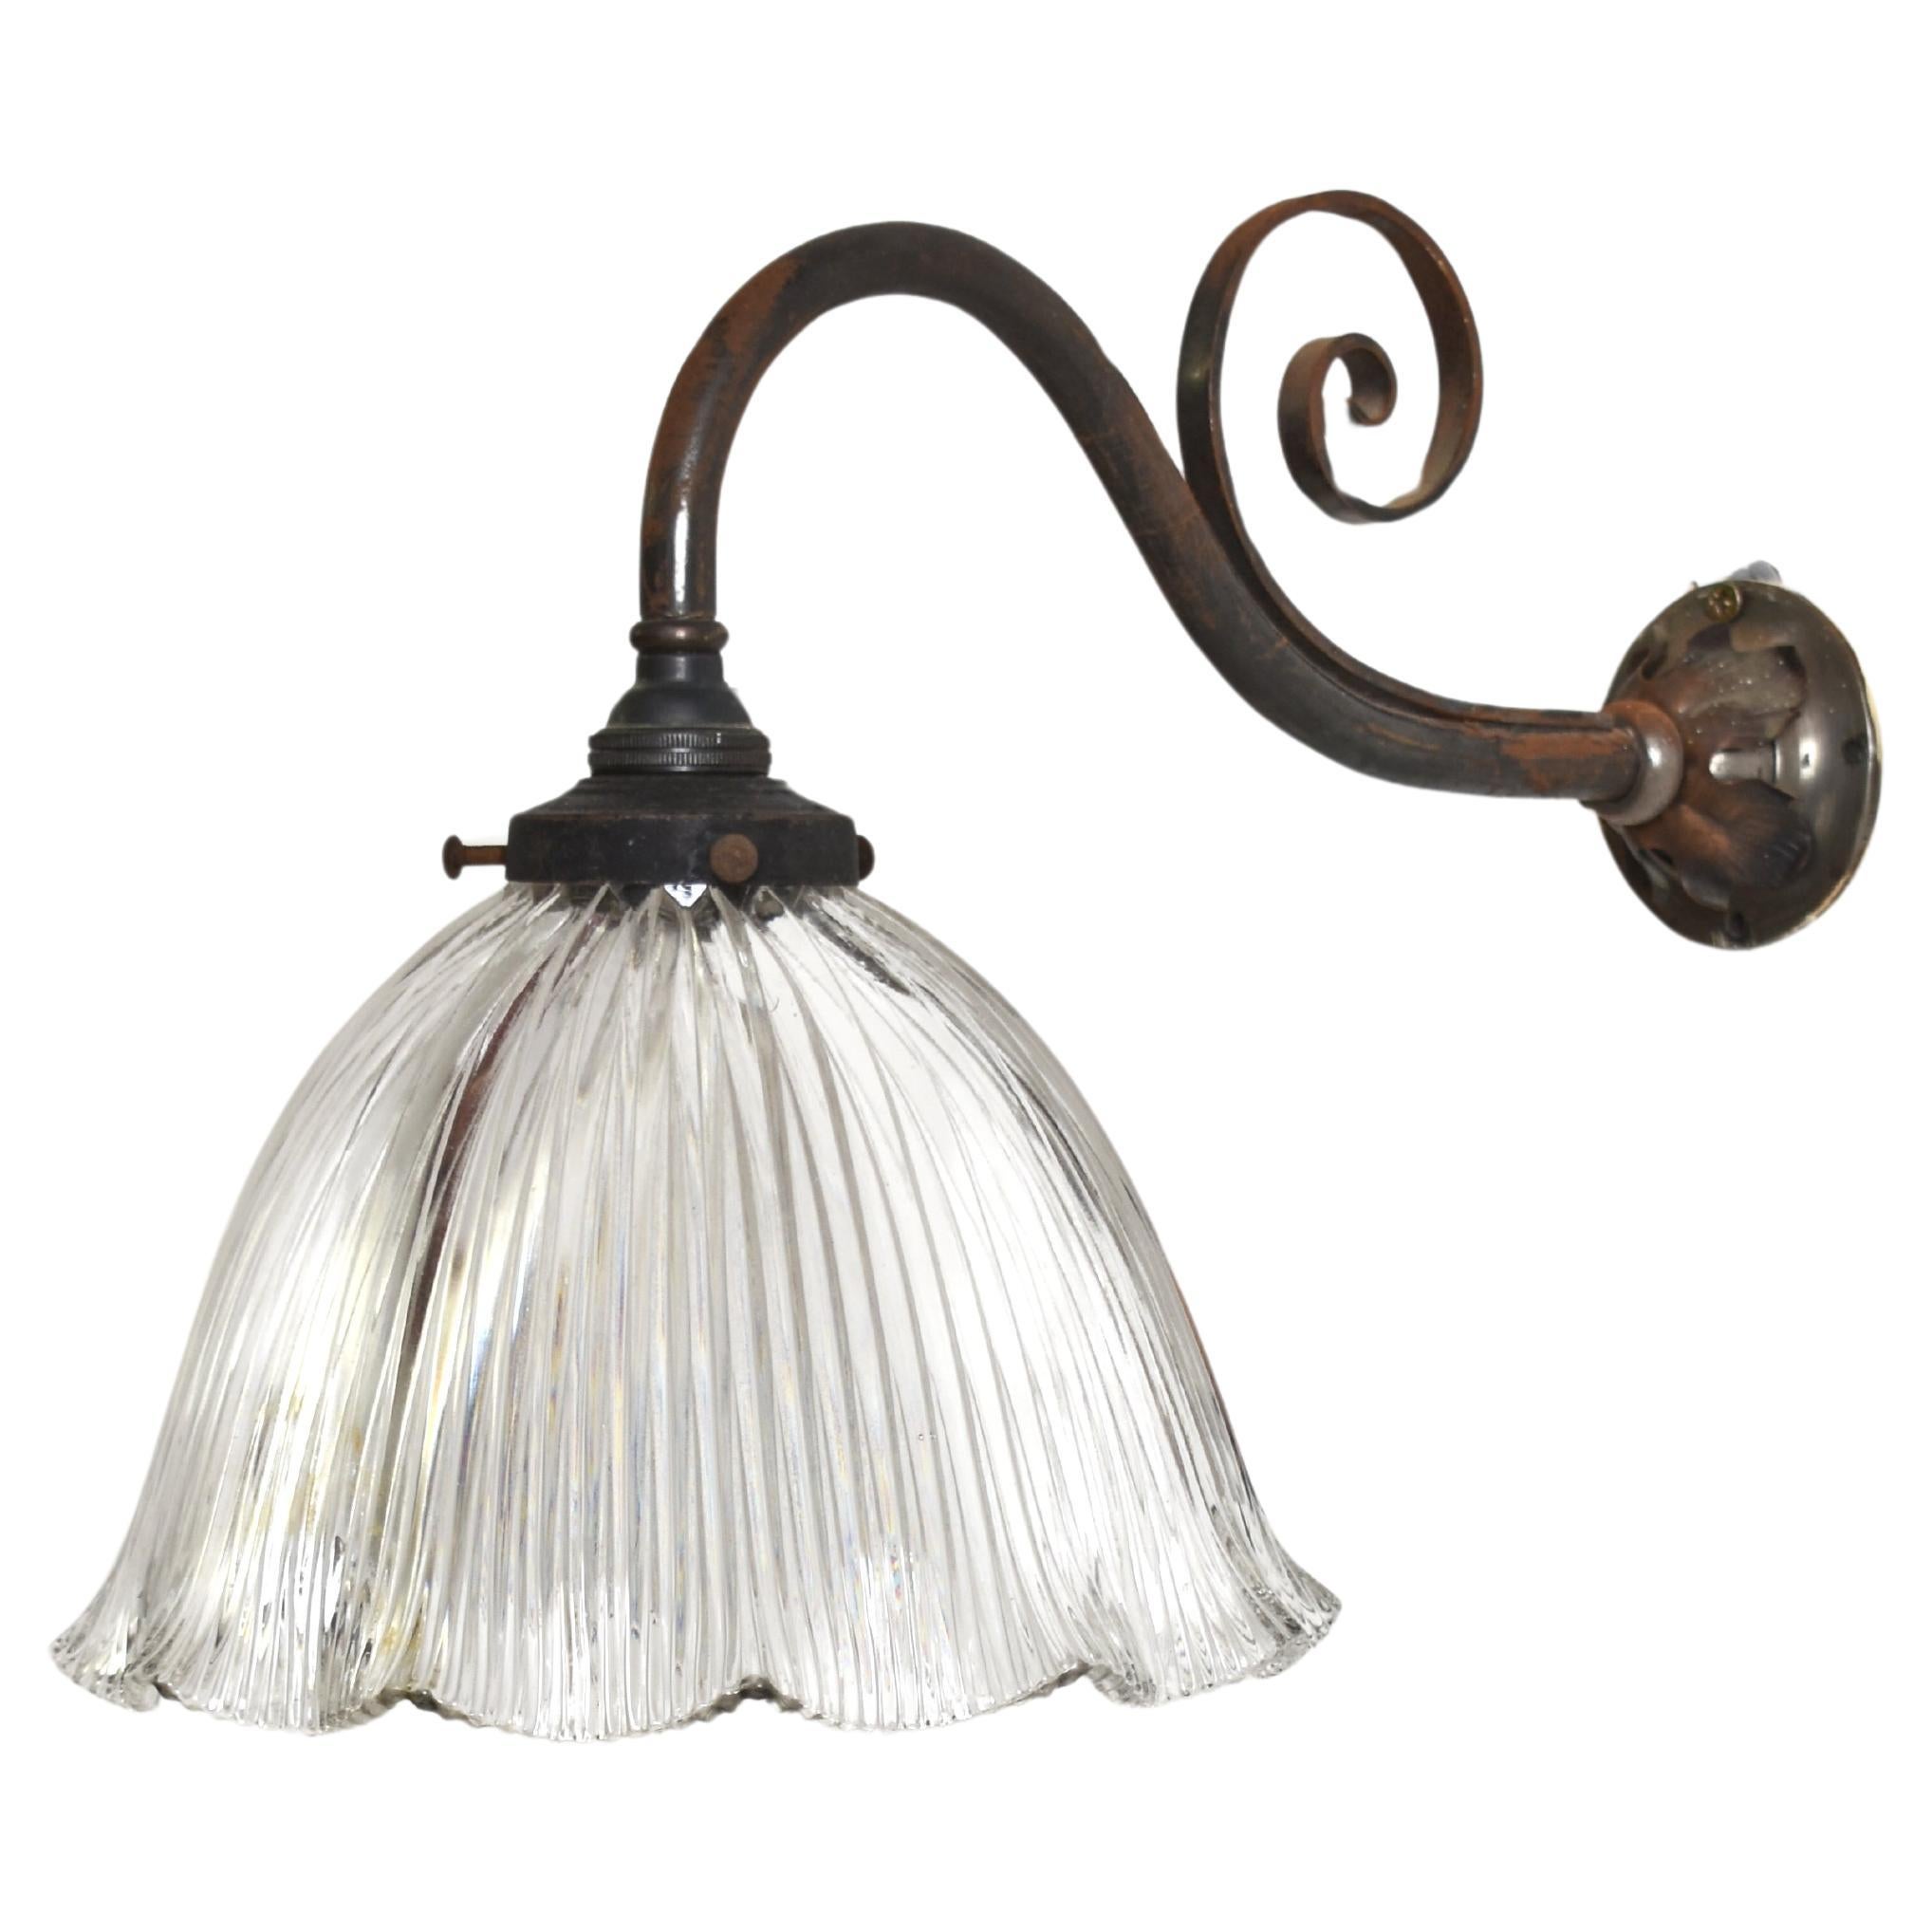 Antique Wall Light with Holophane Glass Shade

An original Holophane glass wall light with original wall bracket. The metalwork has been left in its original condition. These stiletto type glass pendants retain their original Holophane makers mark.